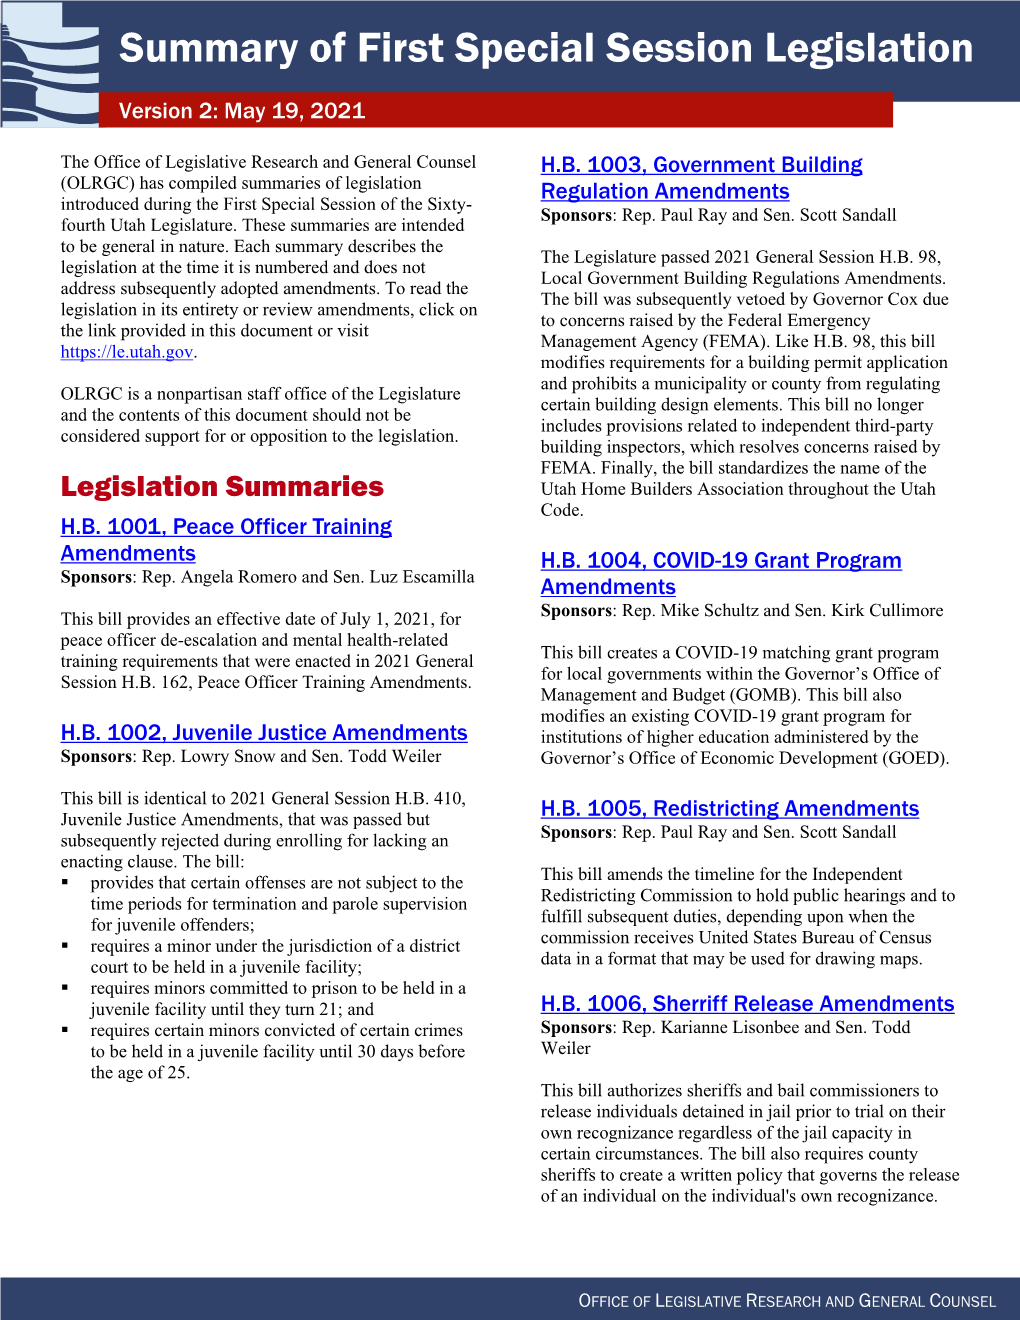 Summary of First Special Session Legislation